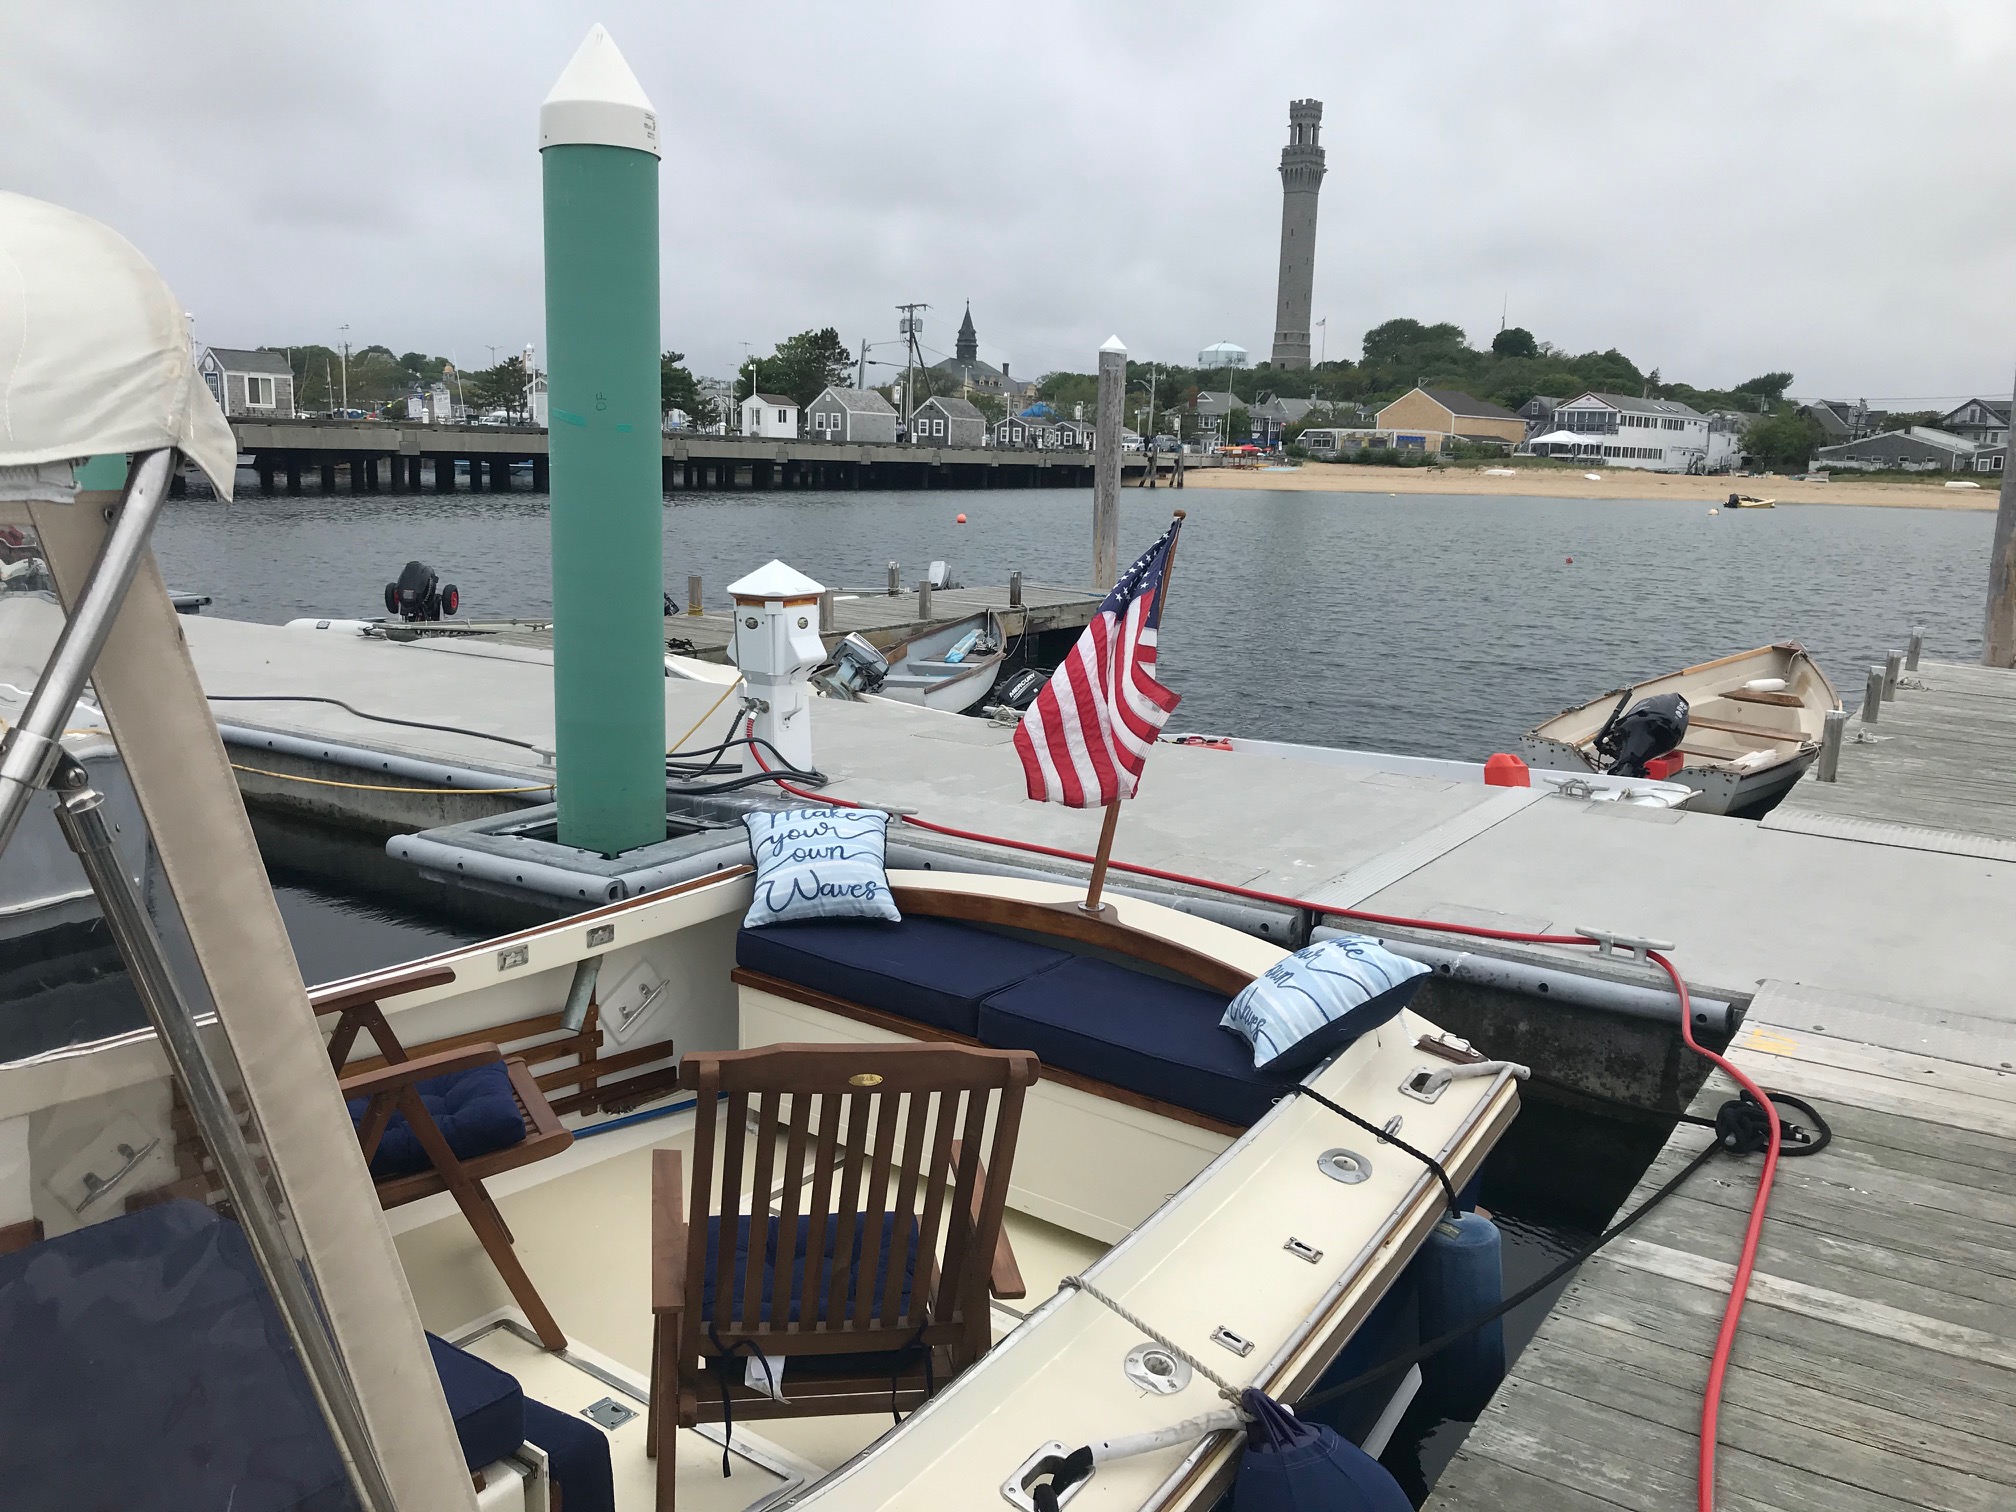 Looking at the Provincetown Monument from Bethie while docked in Provincetown Harbor